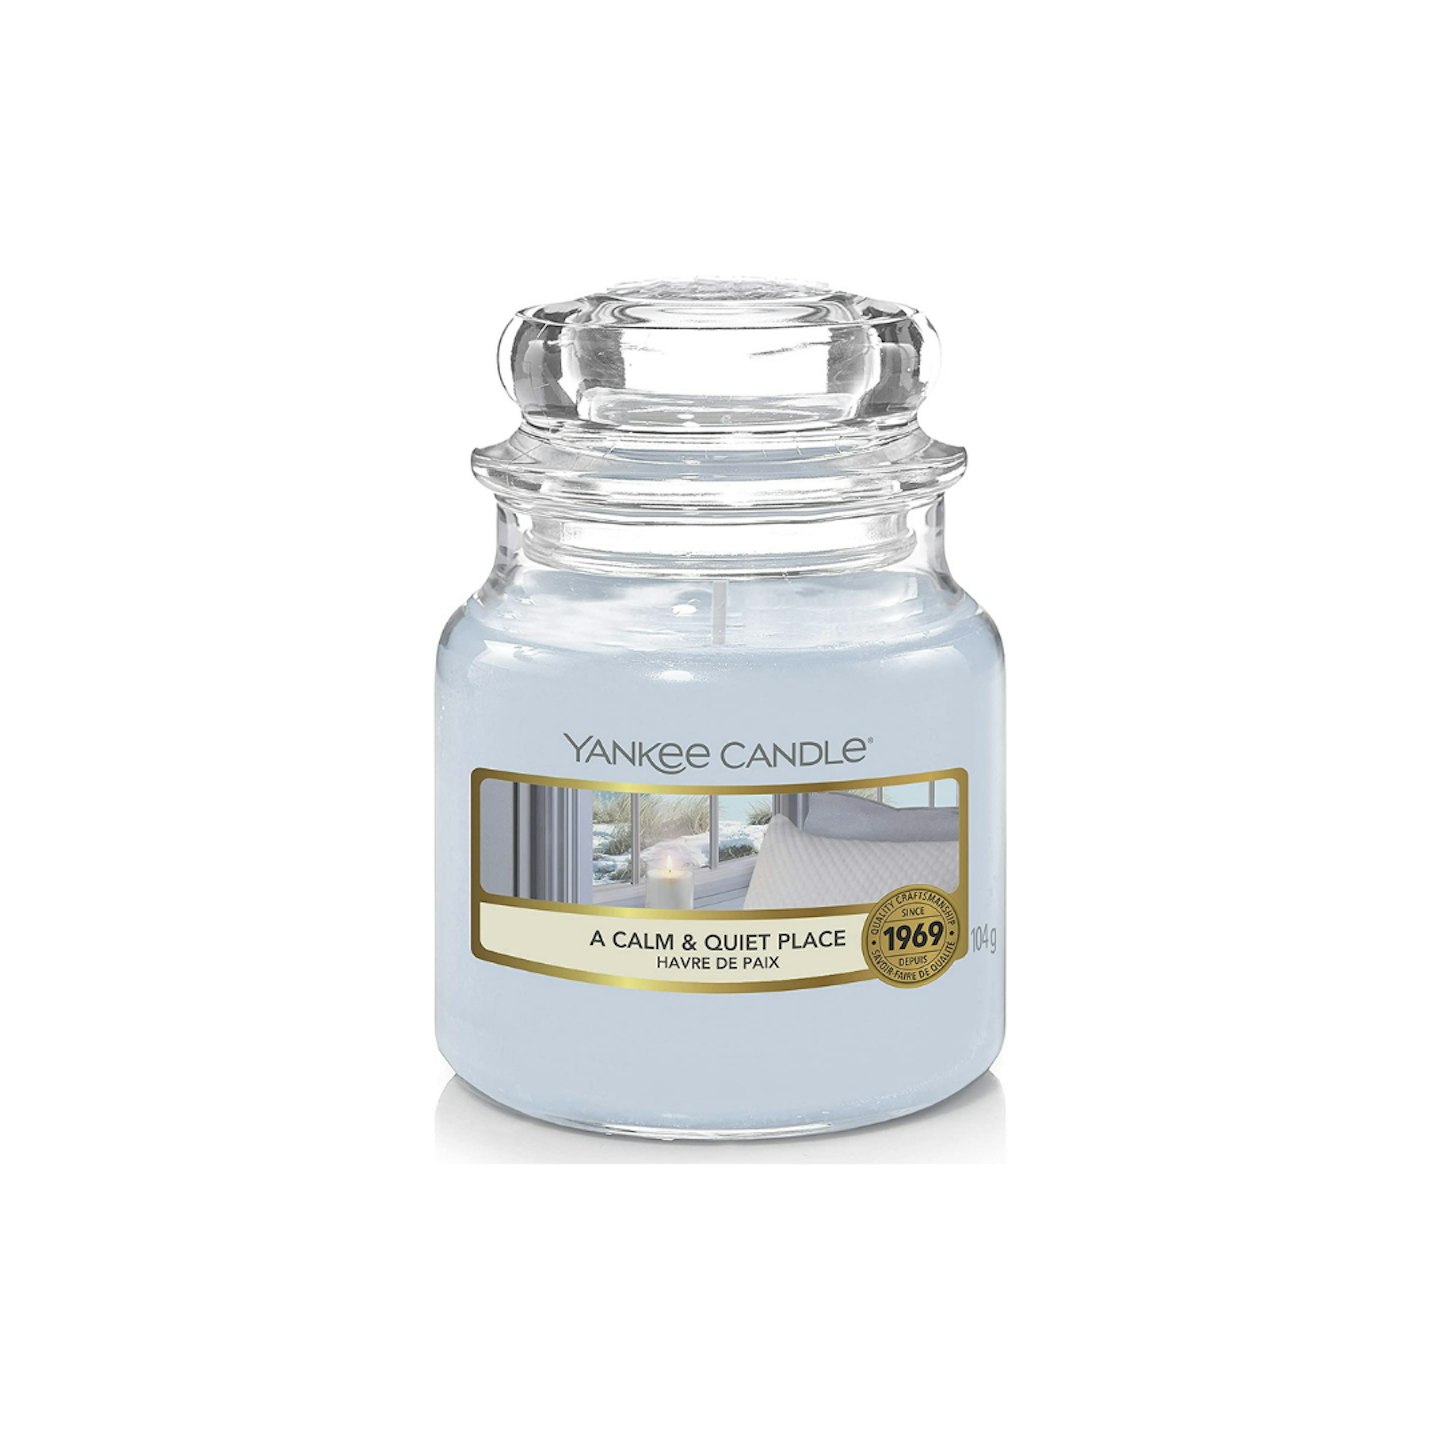 Yankee Candle Scented Candle - A Calm and Quiet Place Small Jar Candle